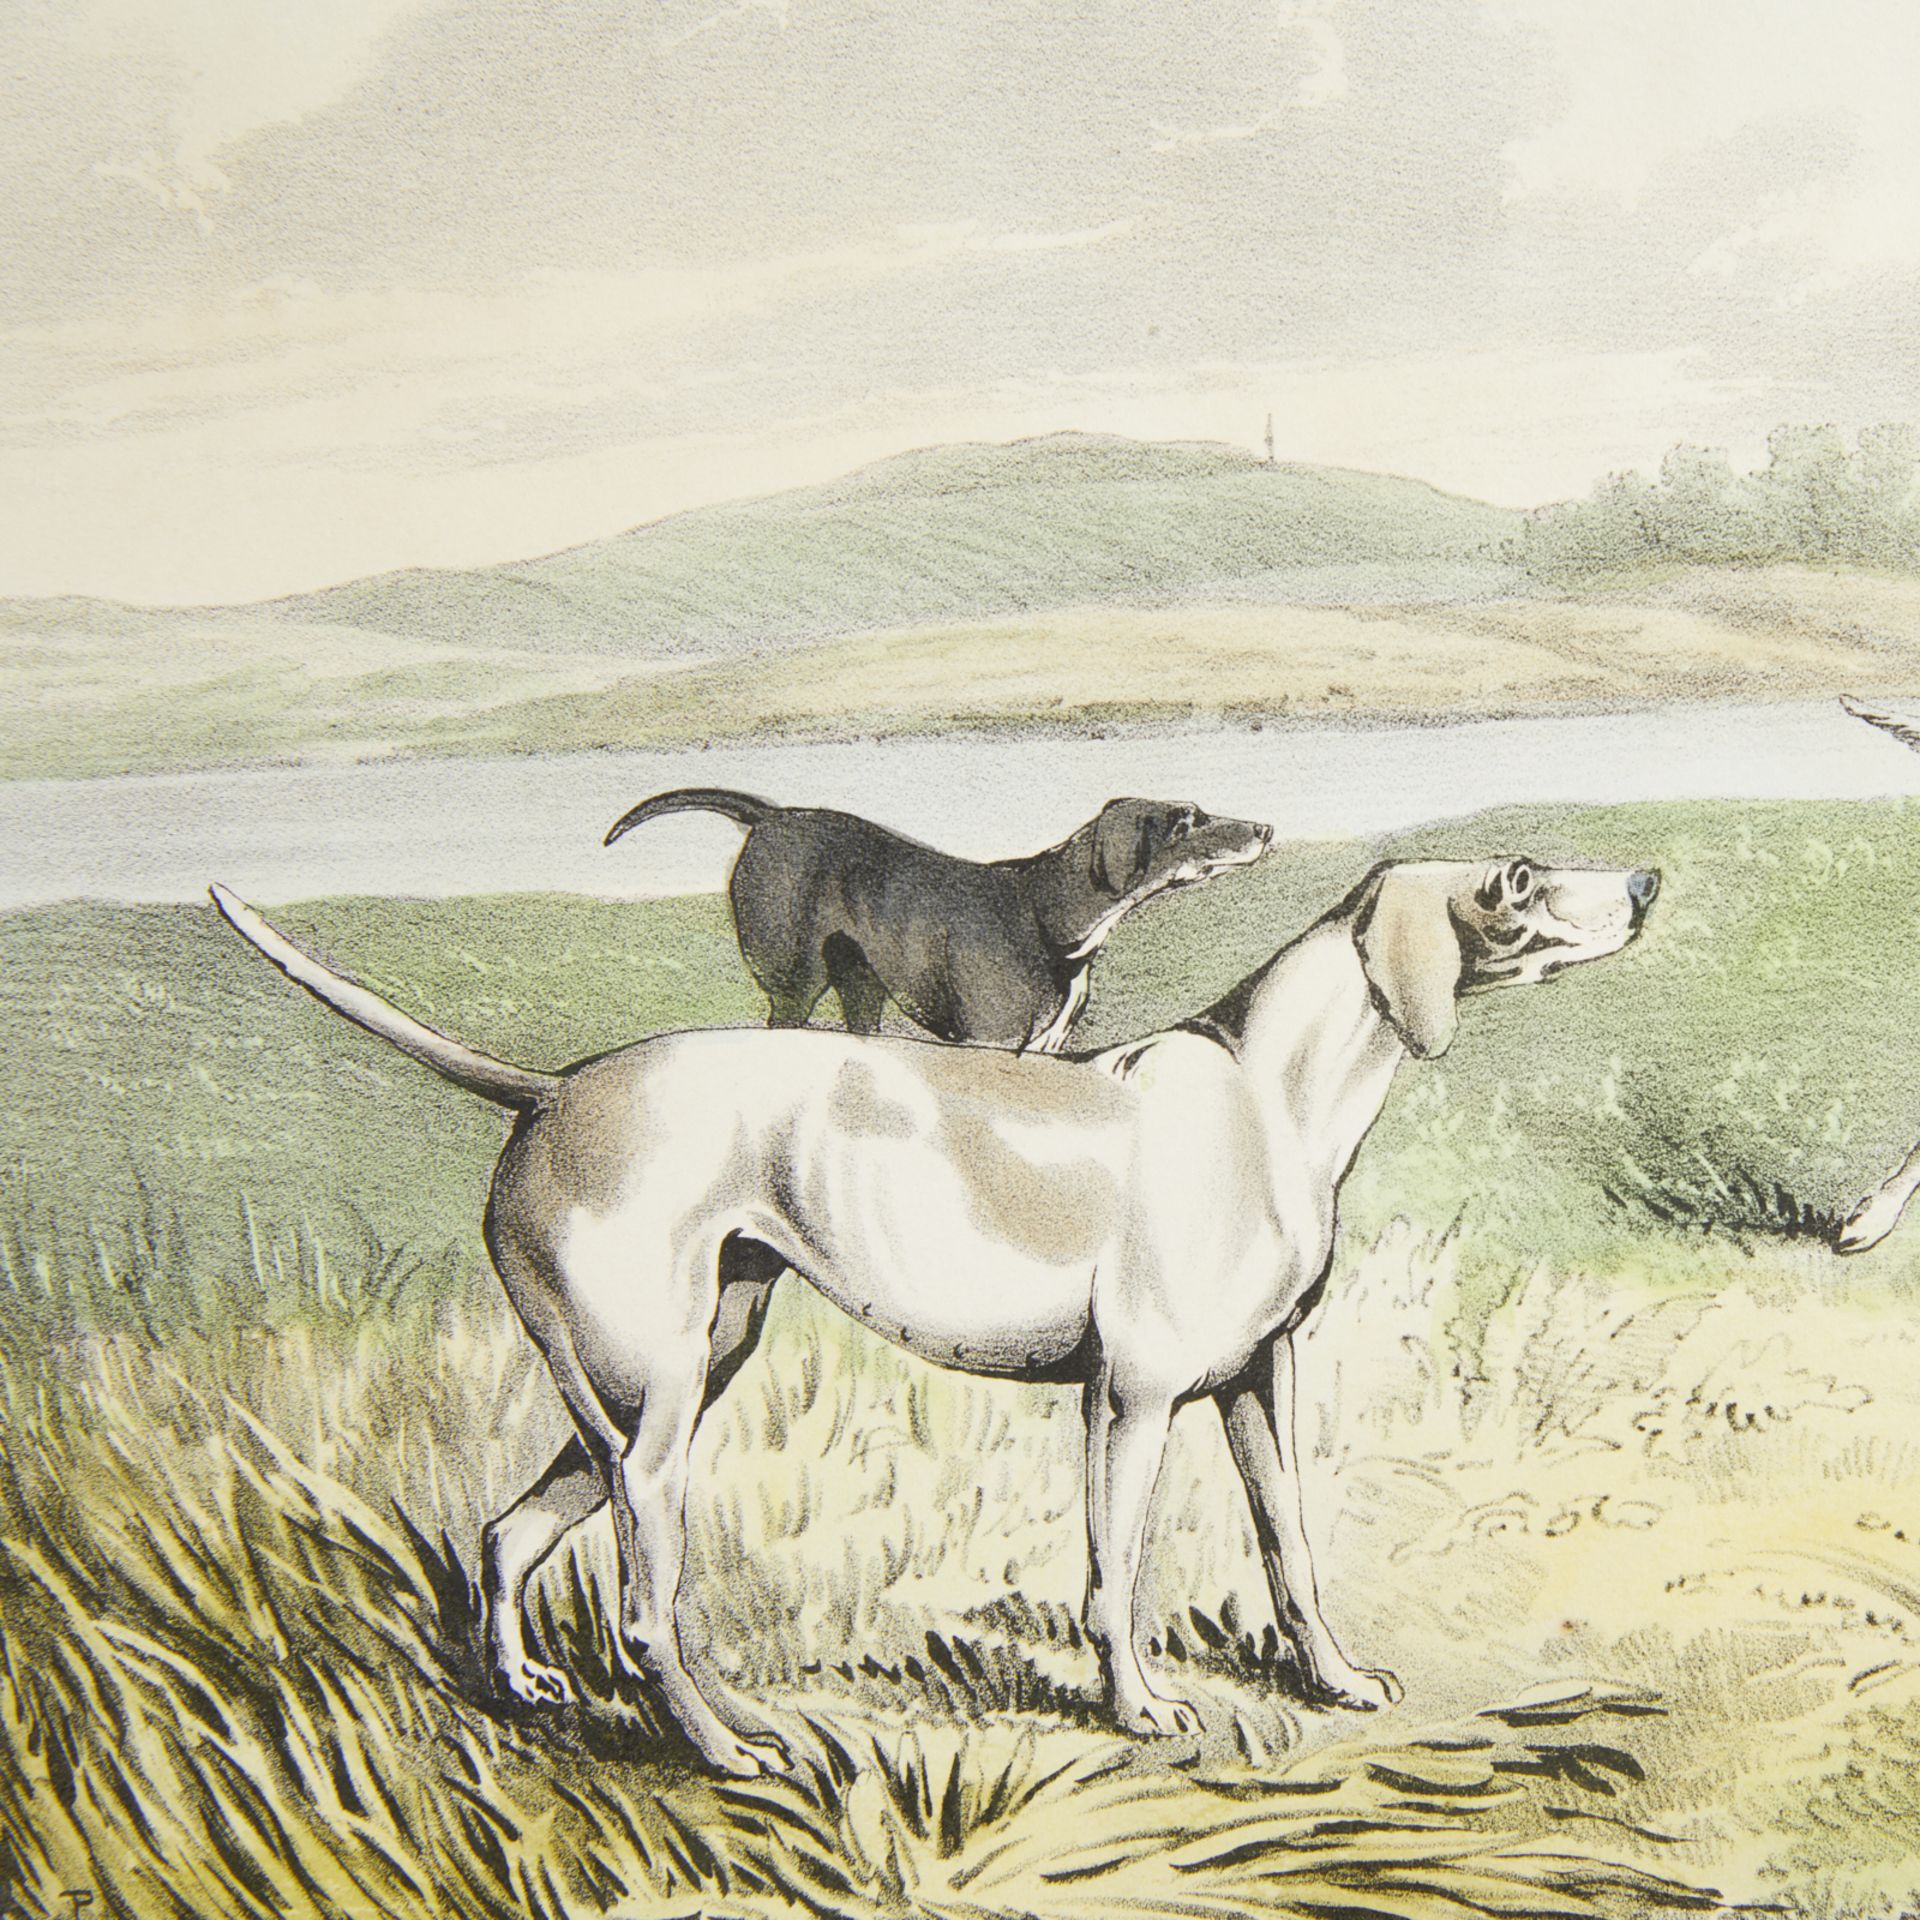 Currier & Ives "Pointers" Print 1846 - Image 6 of 8